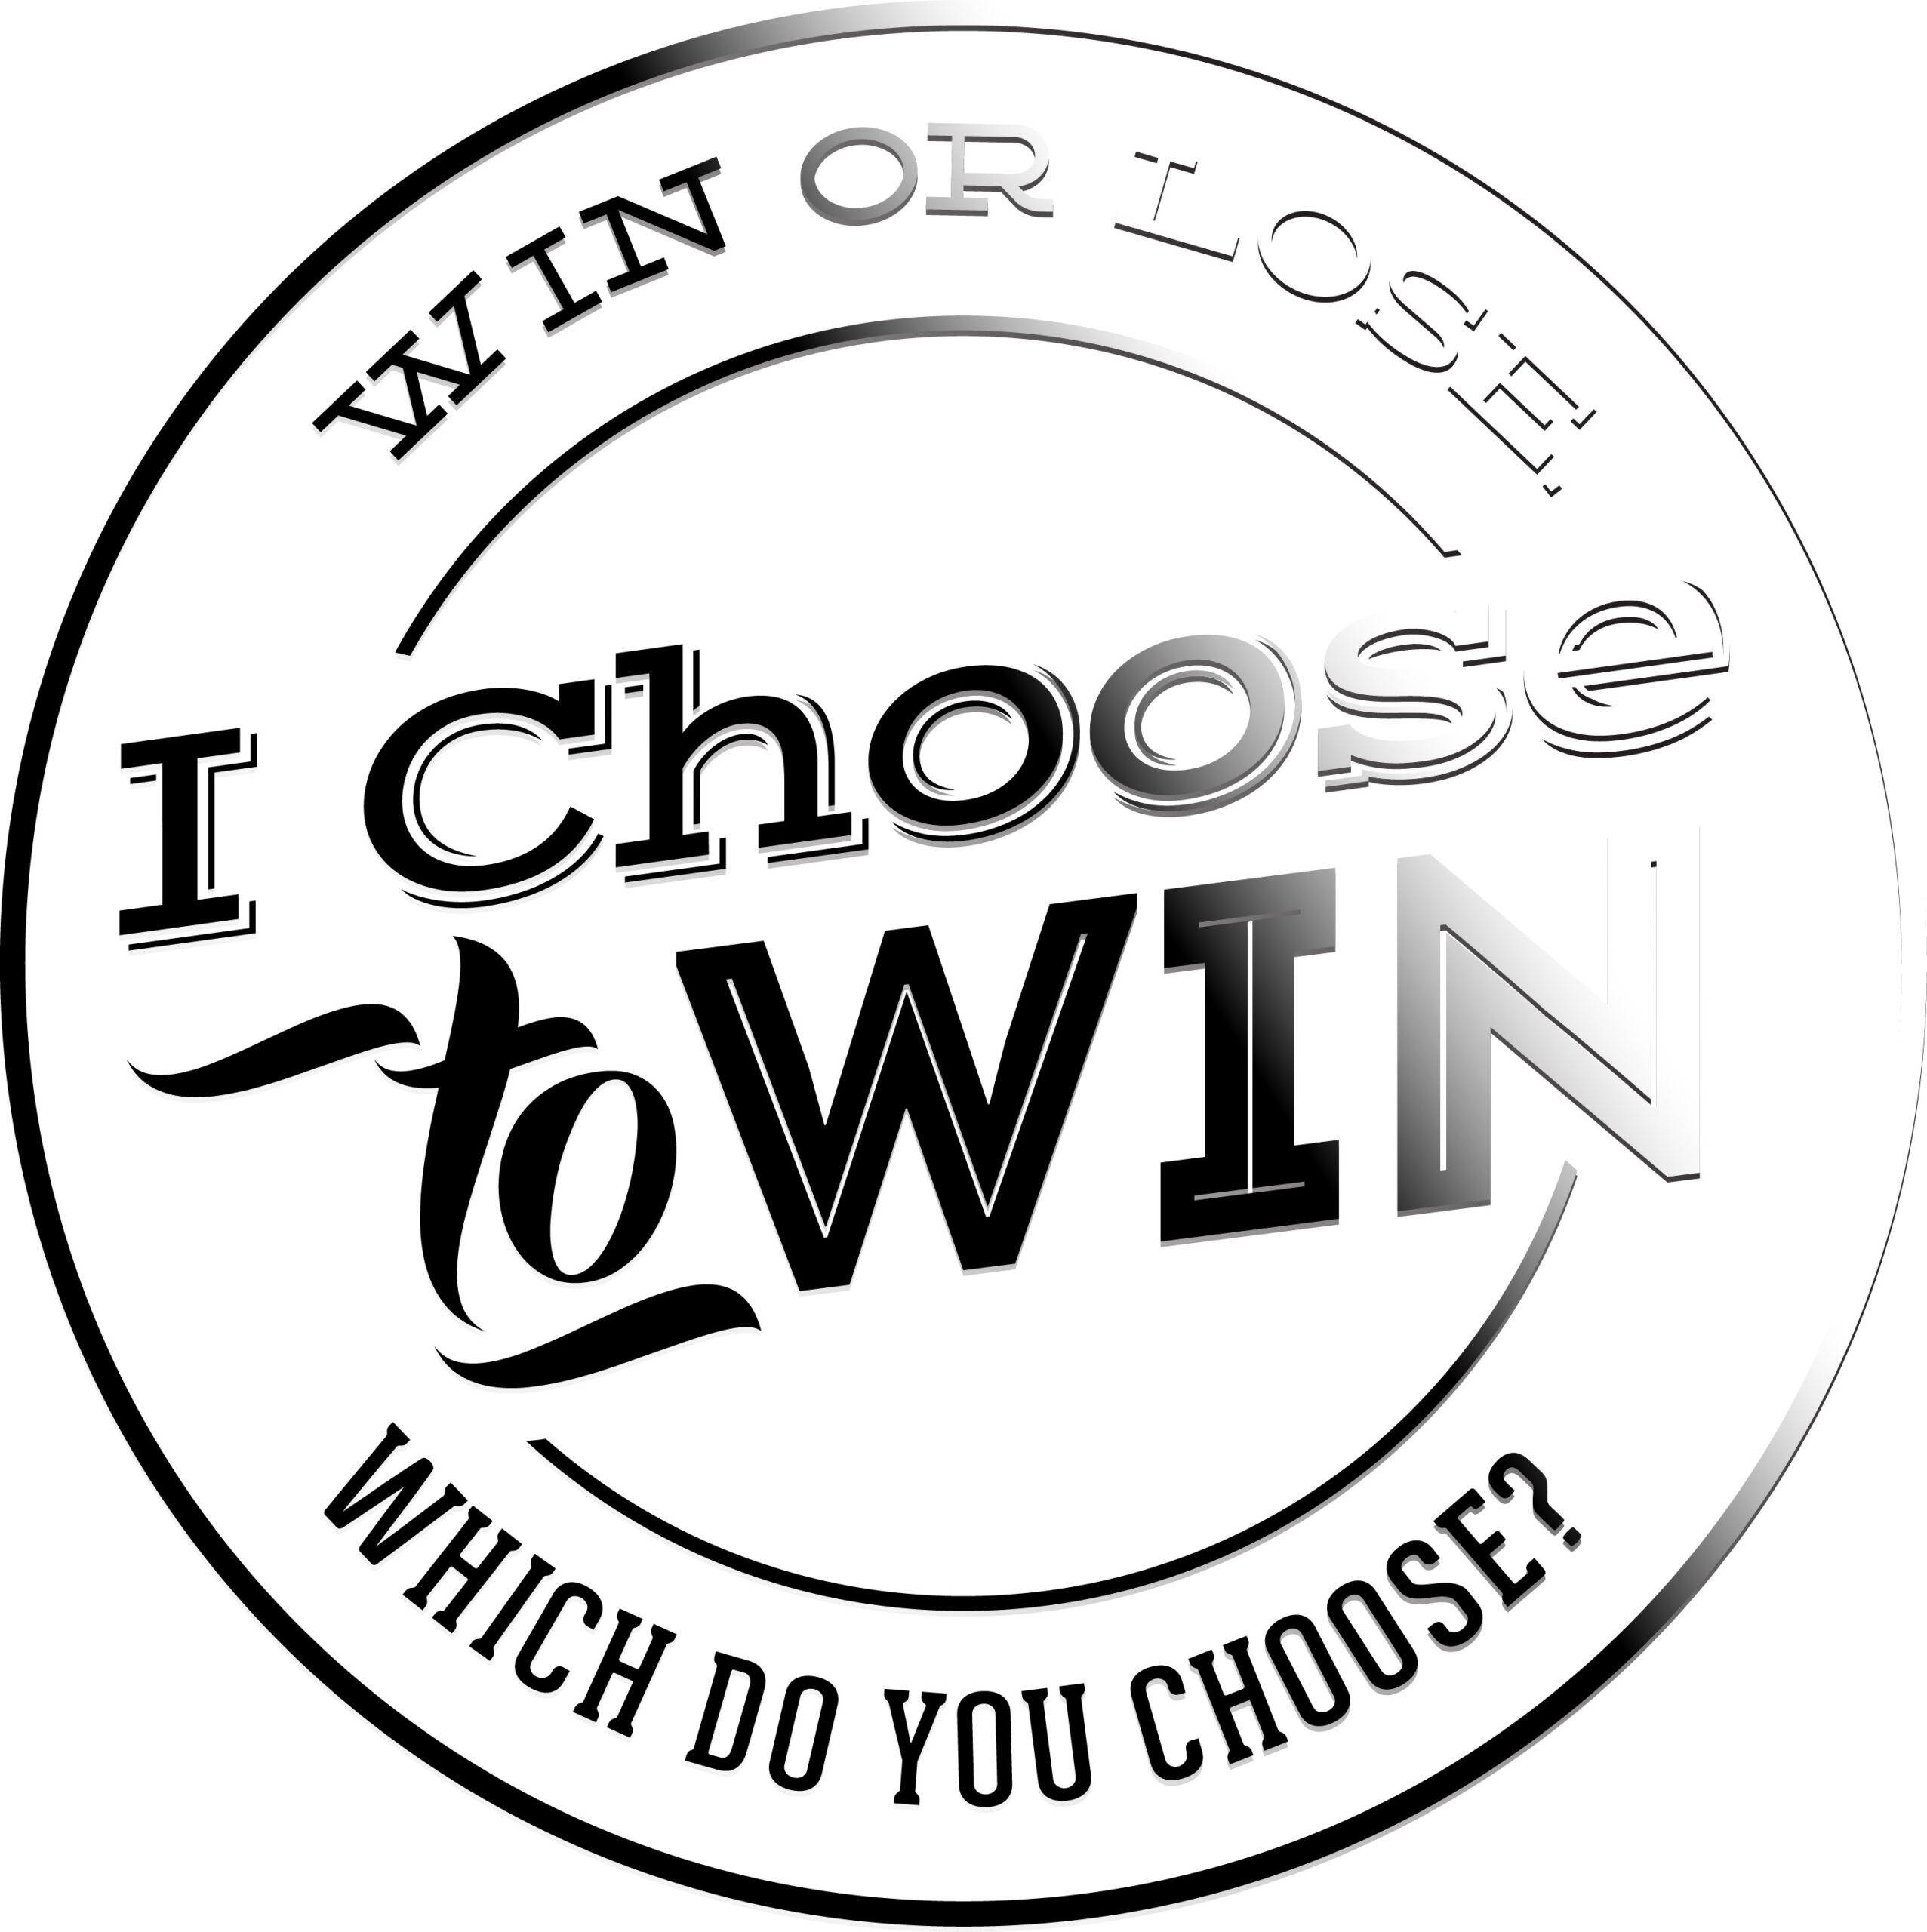 I choose to win